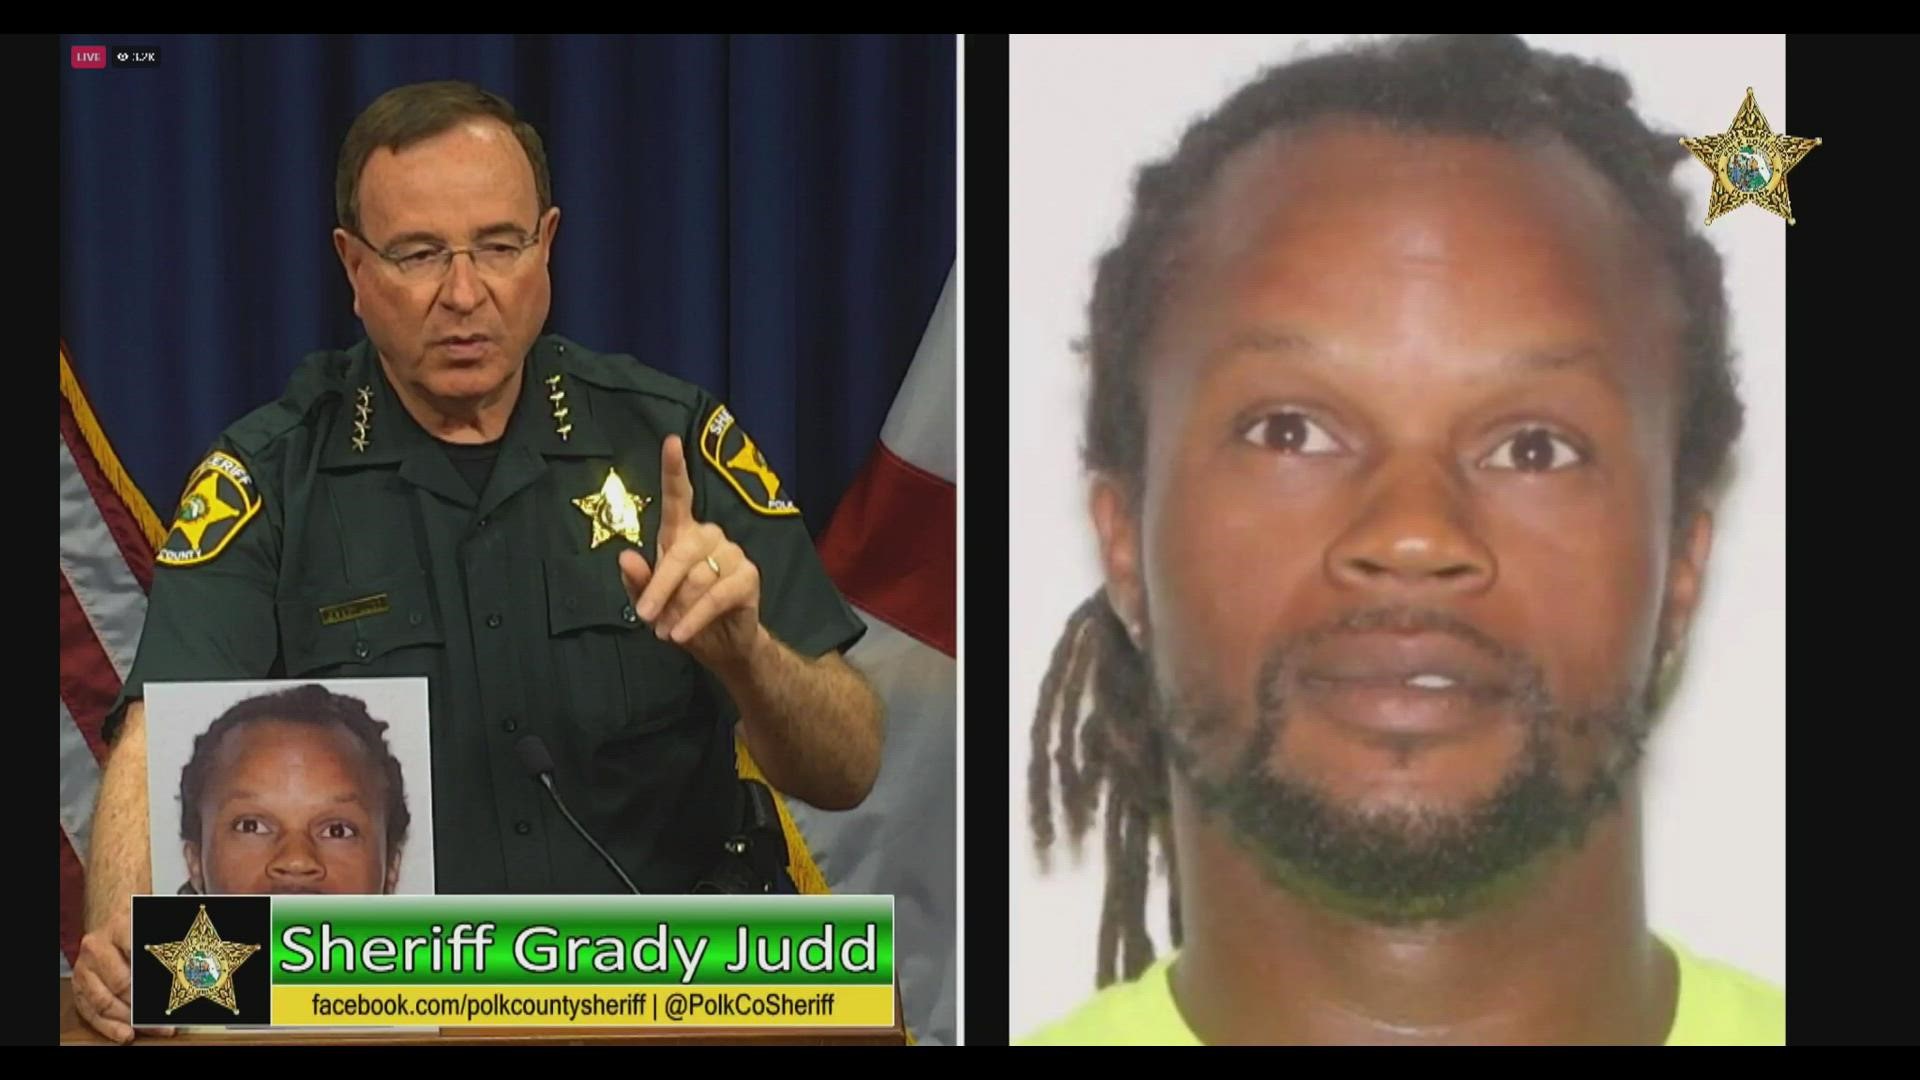 Polk County Sheriff Grady Judd says investigators believe Ronald Donovan, 38, was responsible for starting the shooting.